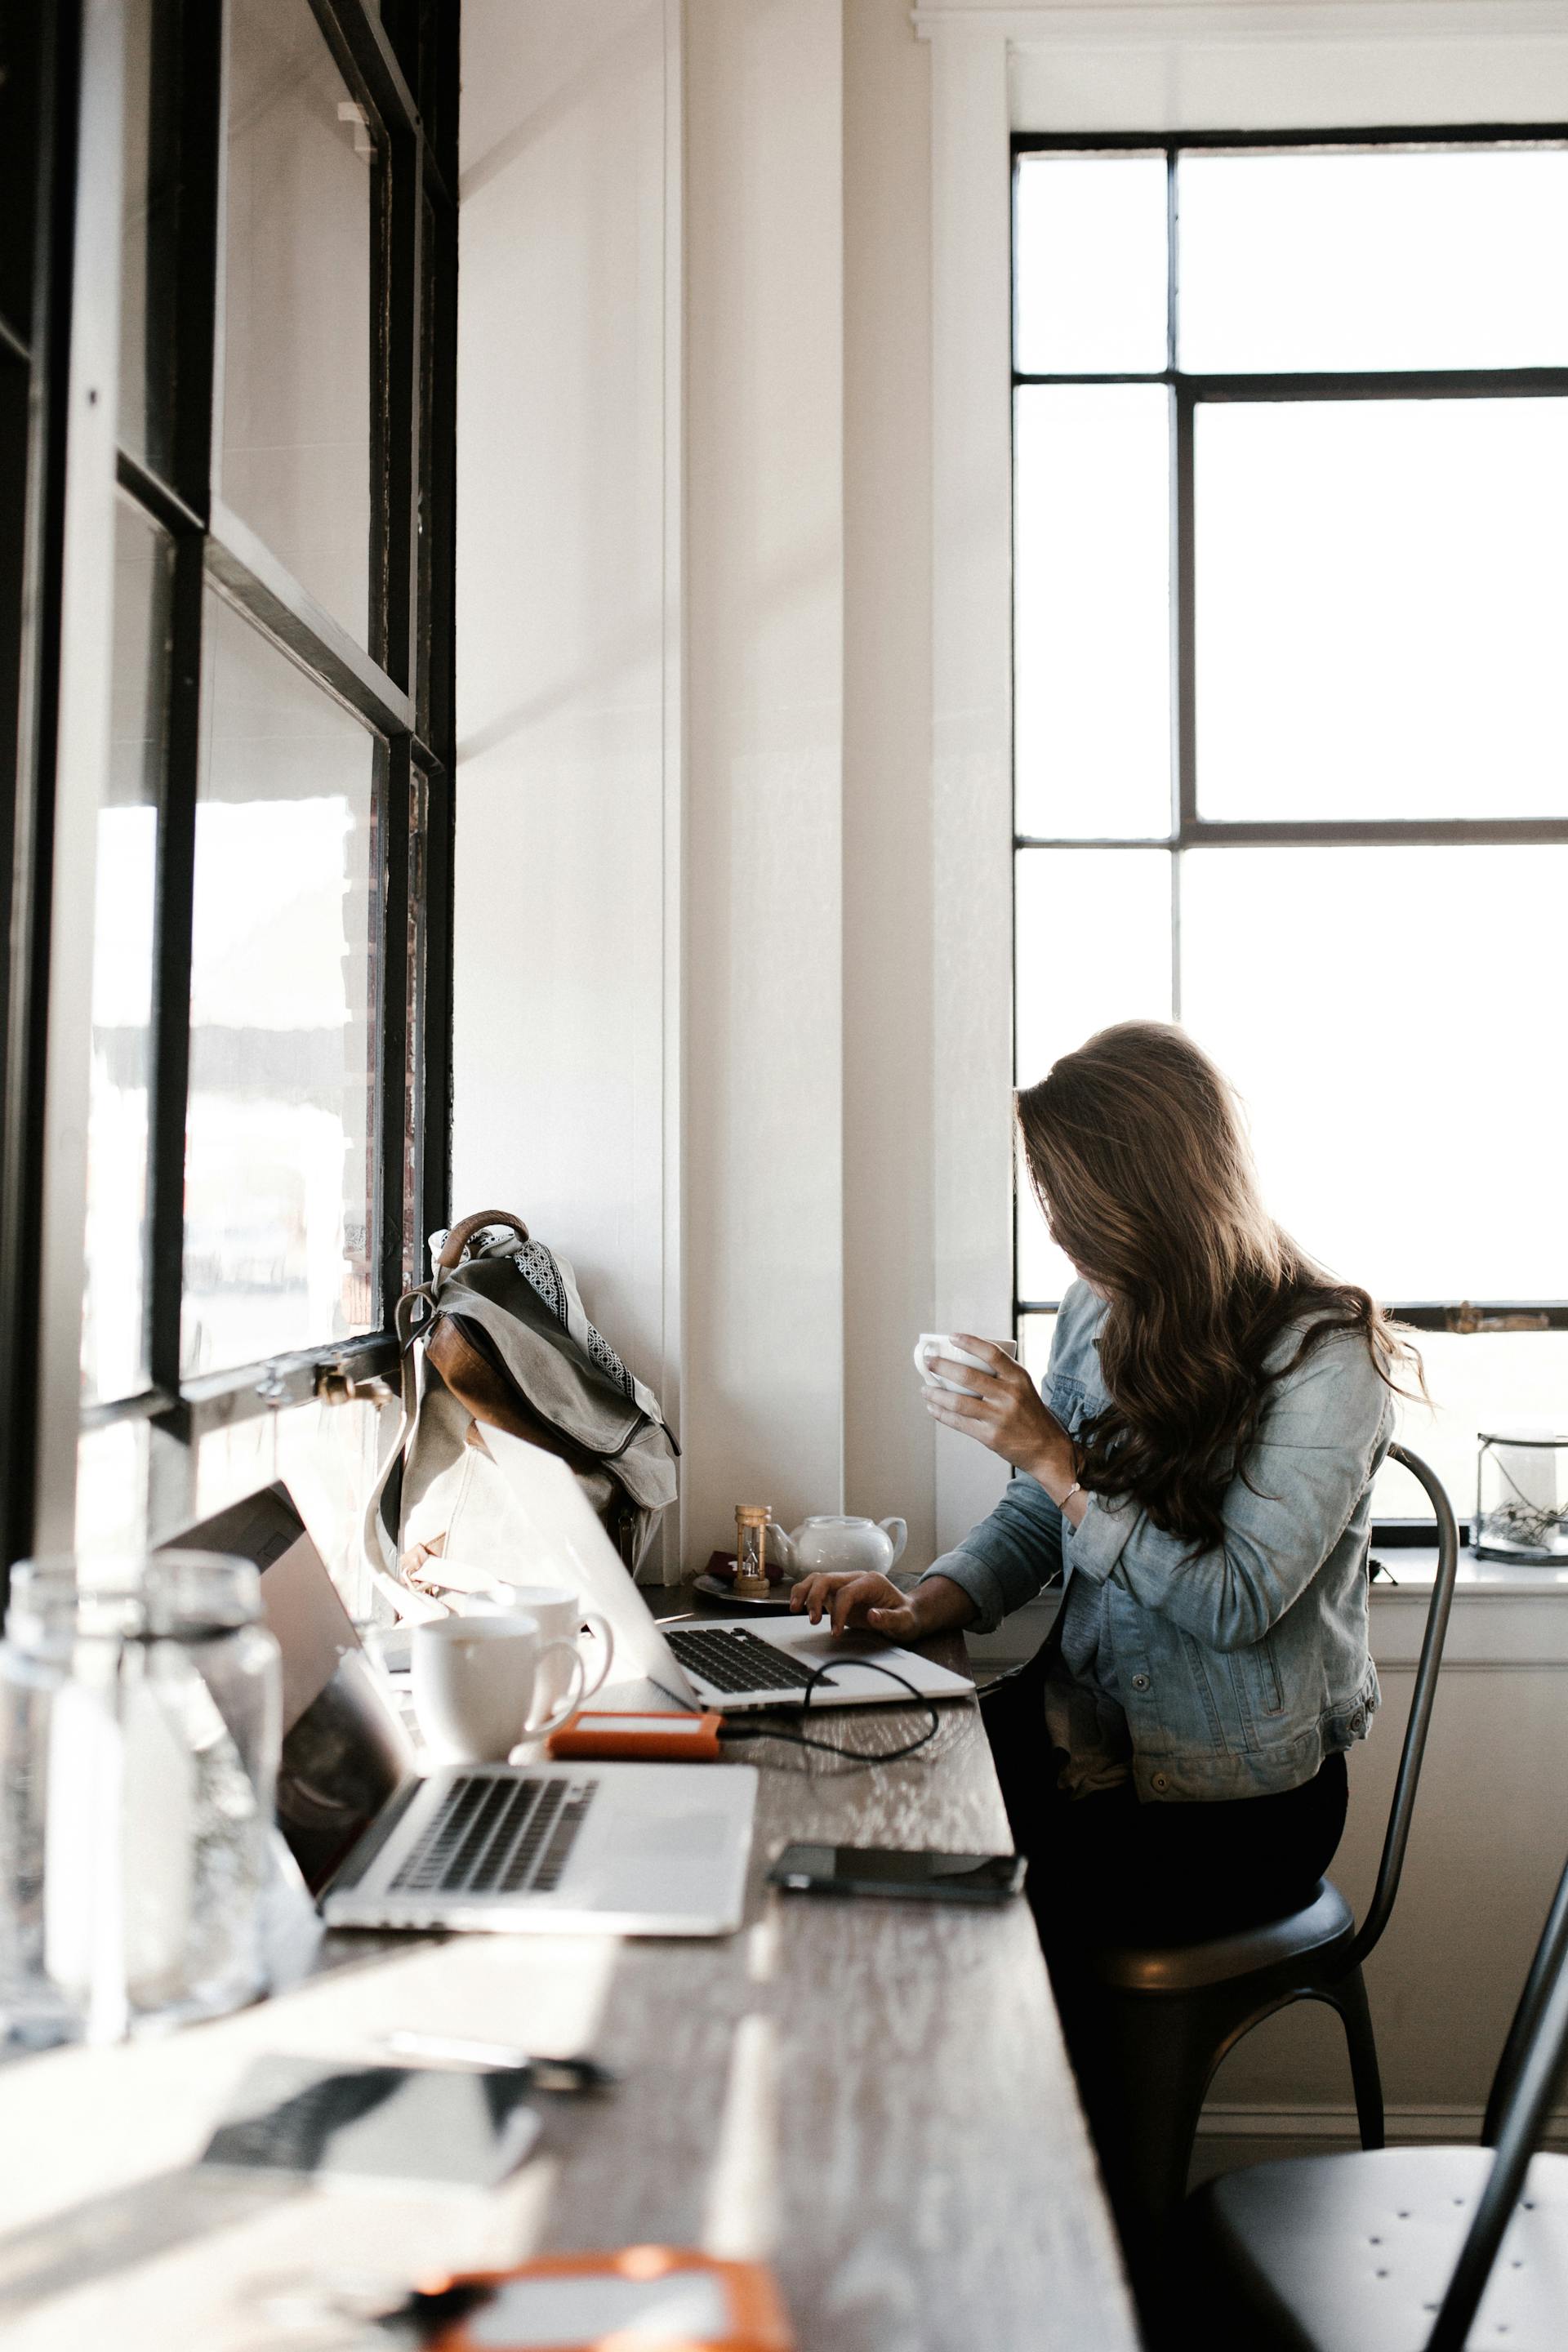 A young woman working on her laptop while sitting beside a desk | Source: Pexels